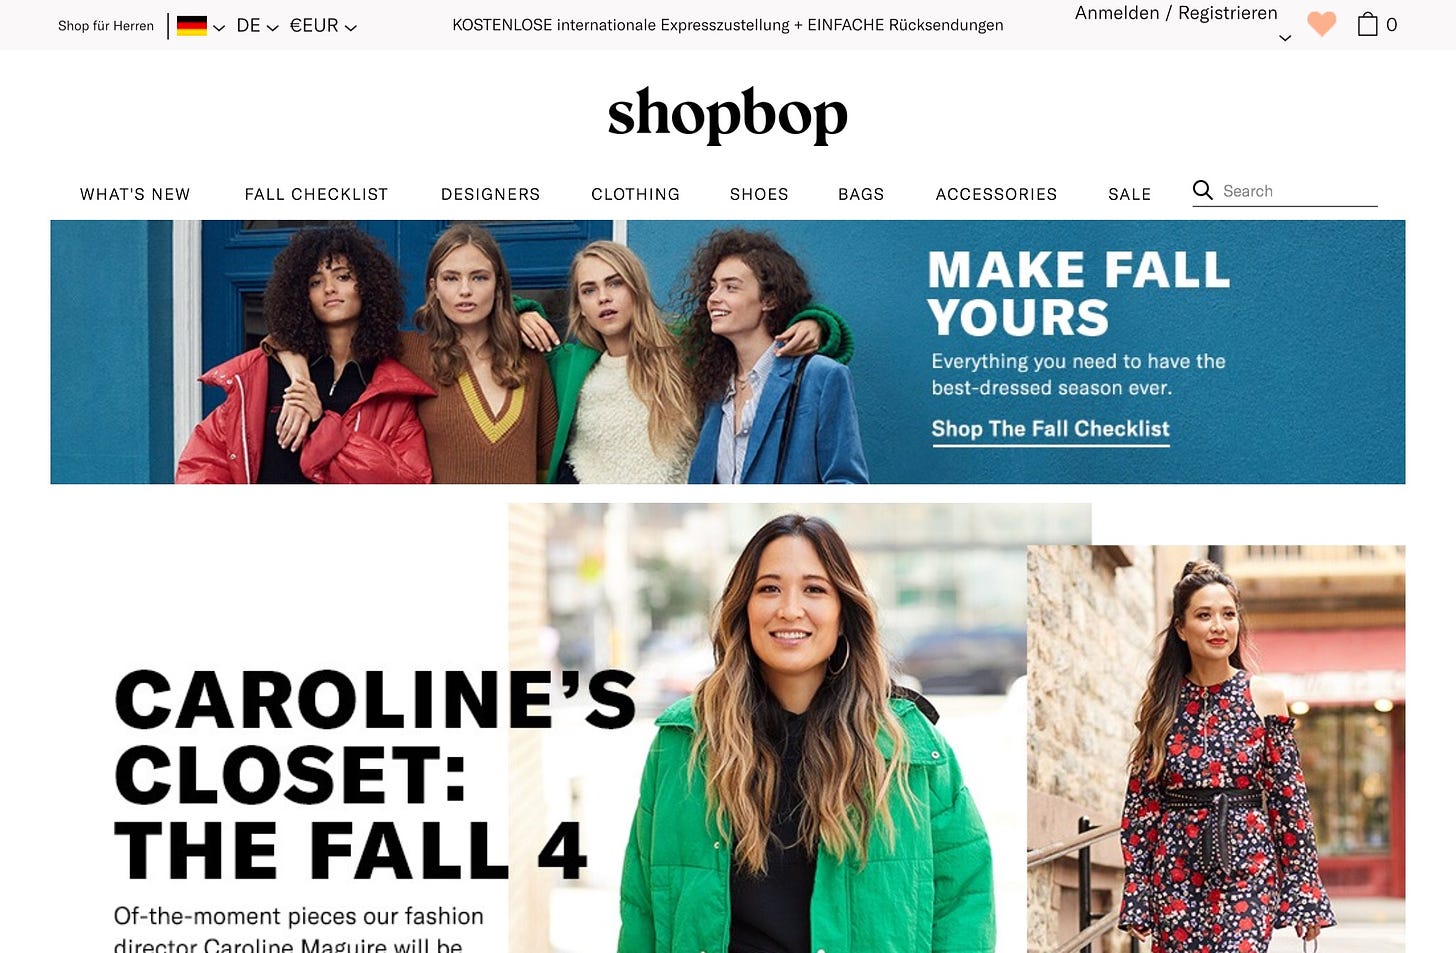 Amazon Keeps (rightly) Pushing Loyalty Programs, Now It's Shopbop's Turn